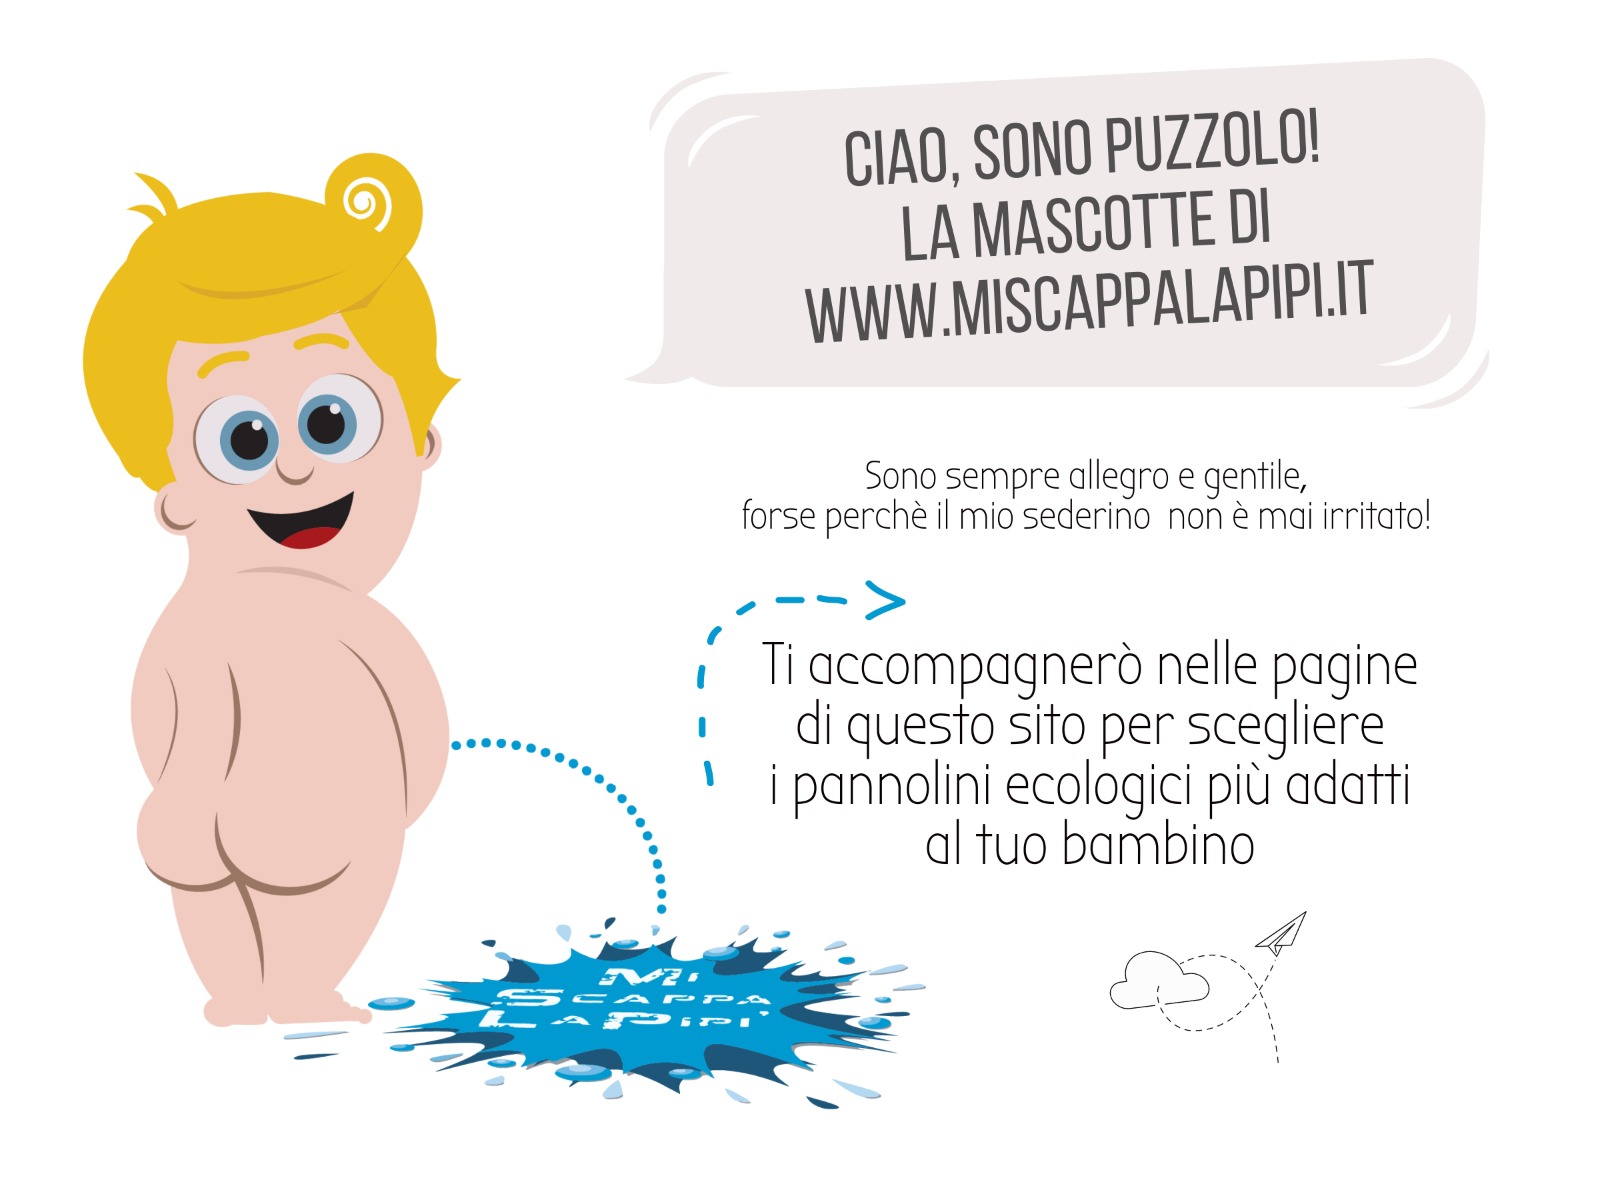 puzzolo-mascotte-miscappalapipi